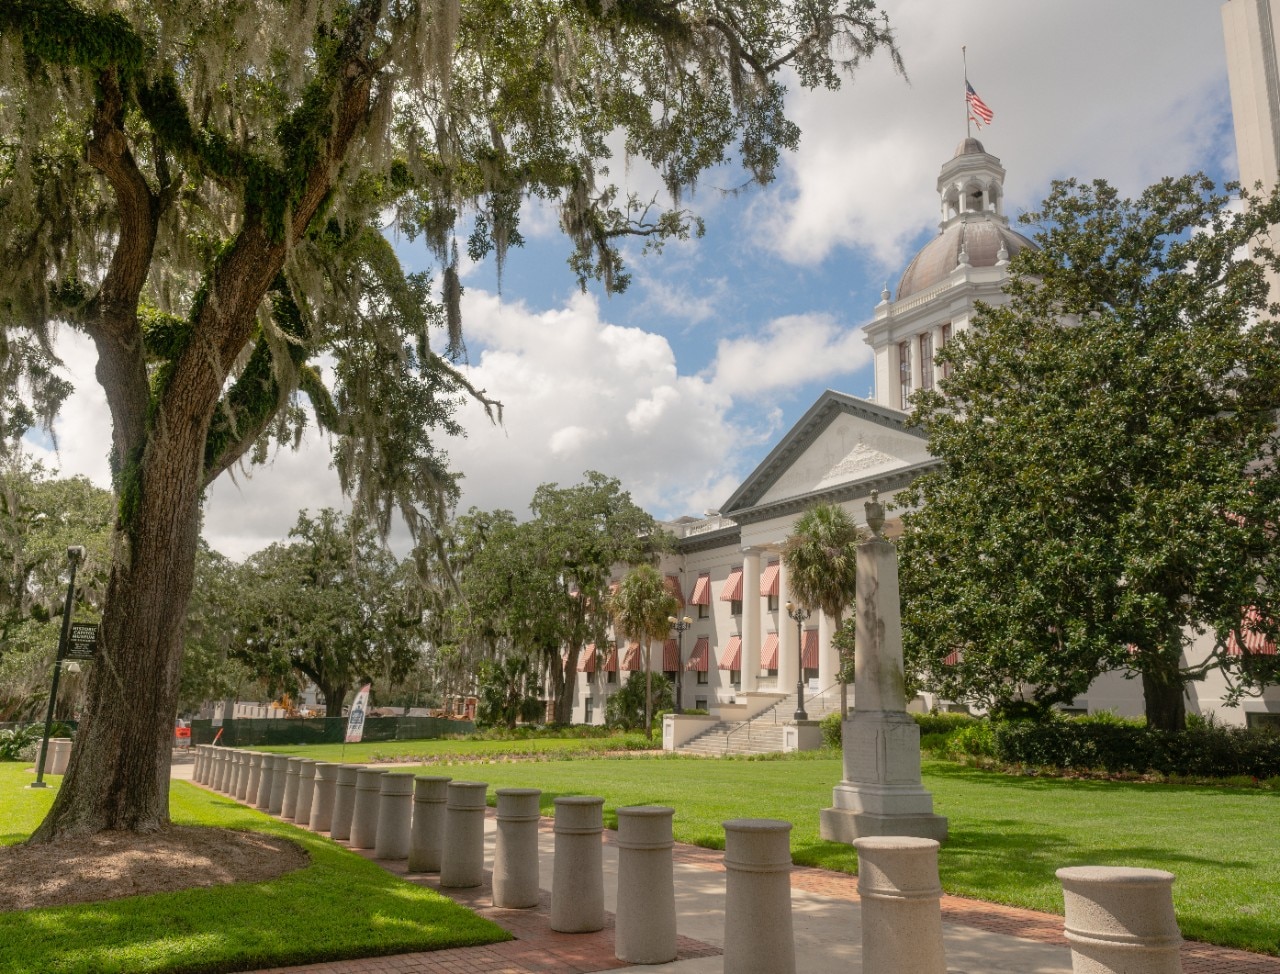 Security Barriers Protect The State Capital Building in Tallahassee Florida